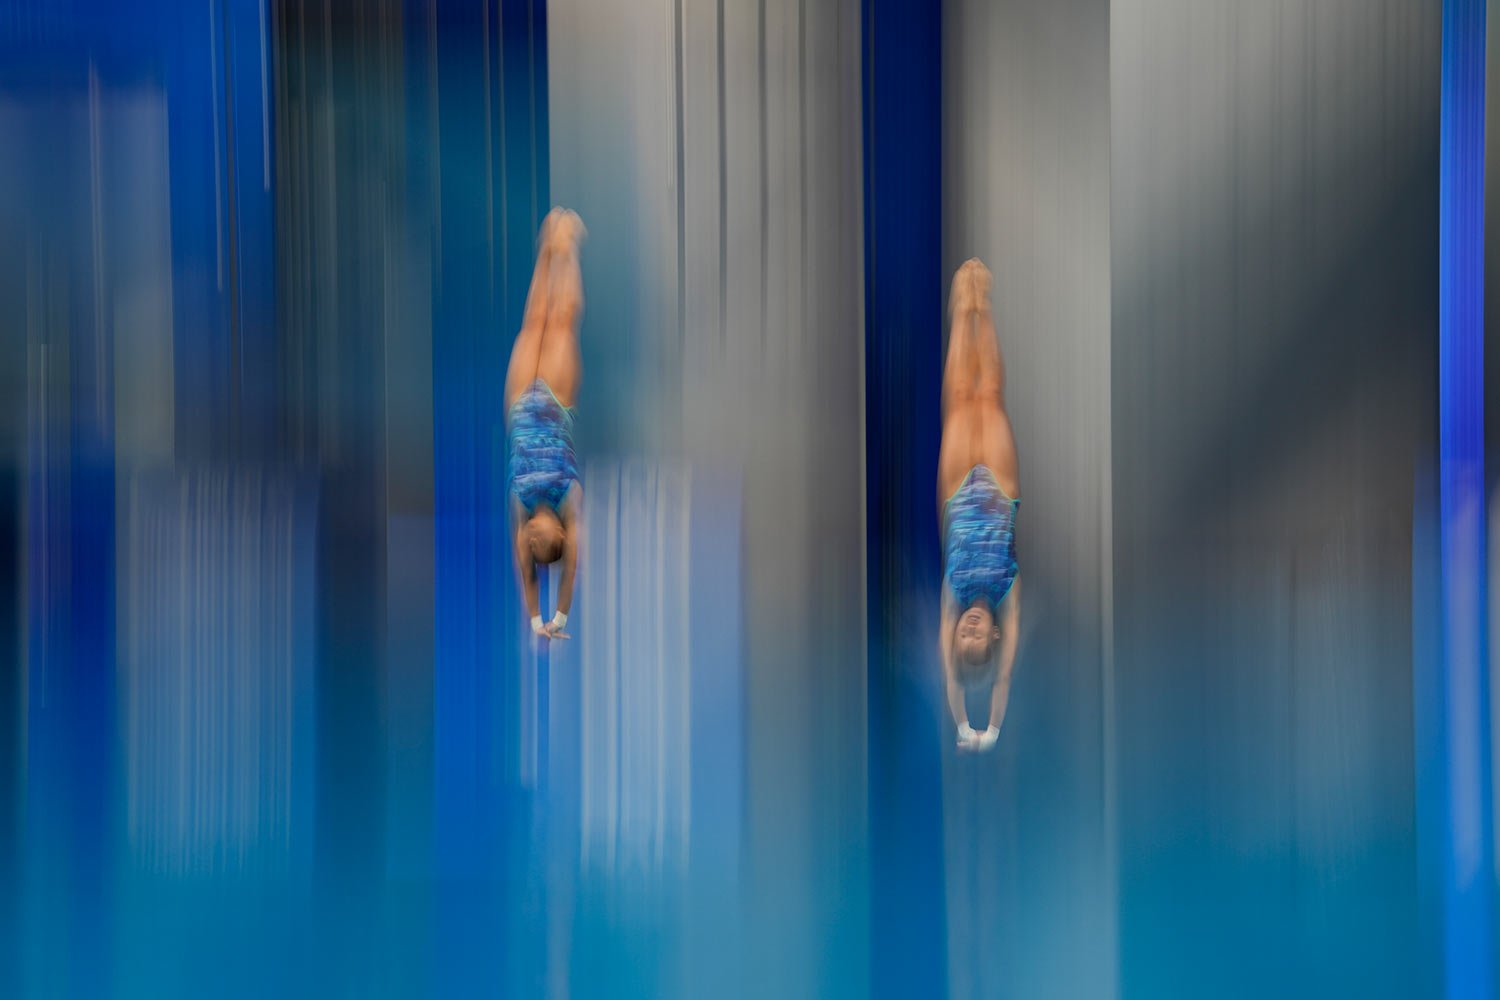  Macau's Zhao Hang U and Lo Ka Wai compete during the women's synchronised 10m platform diving final of the 19th Asian Games in Hangzhou, China, Saturday, Sept. 30, 2023. (AP Photo/Aaron Favila) 